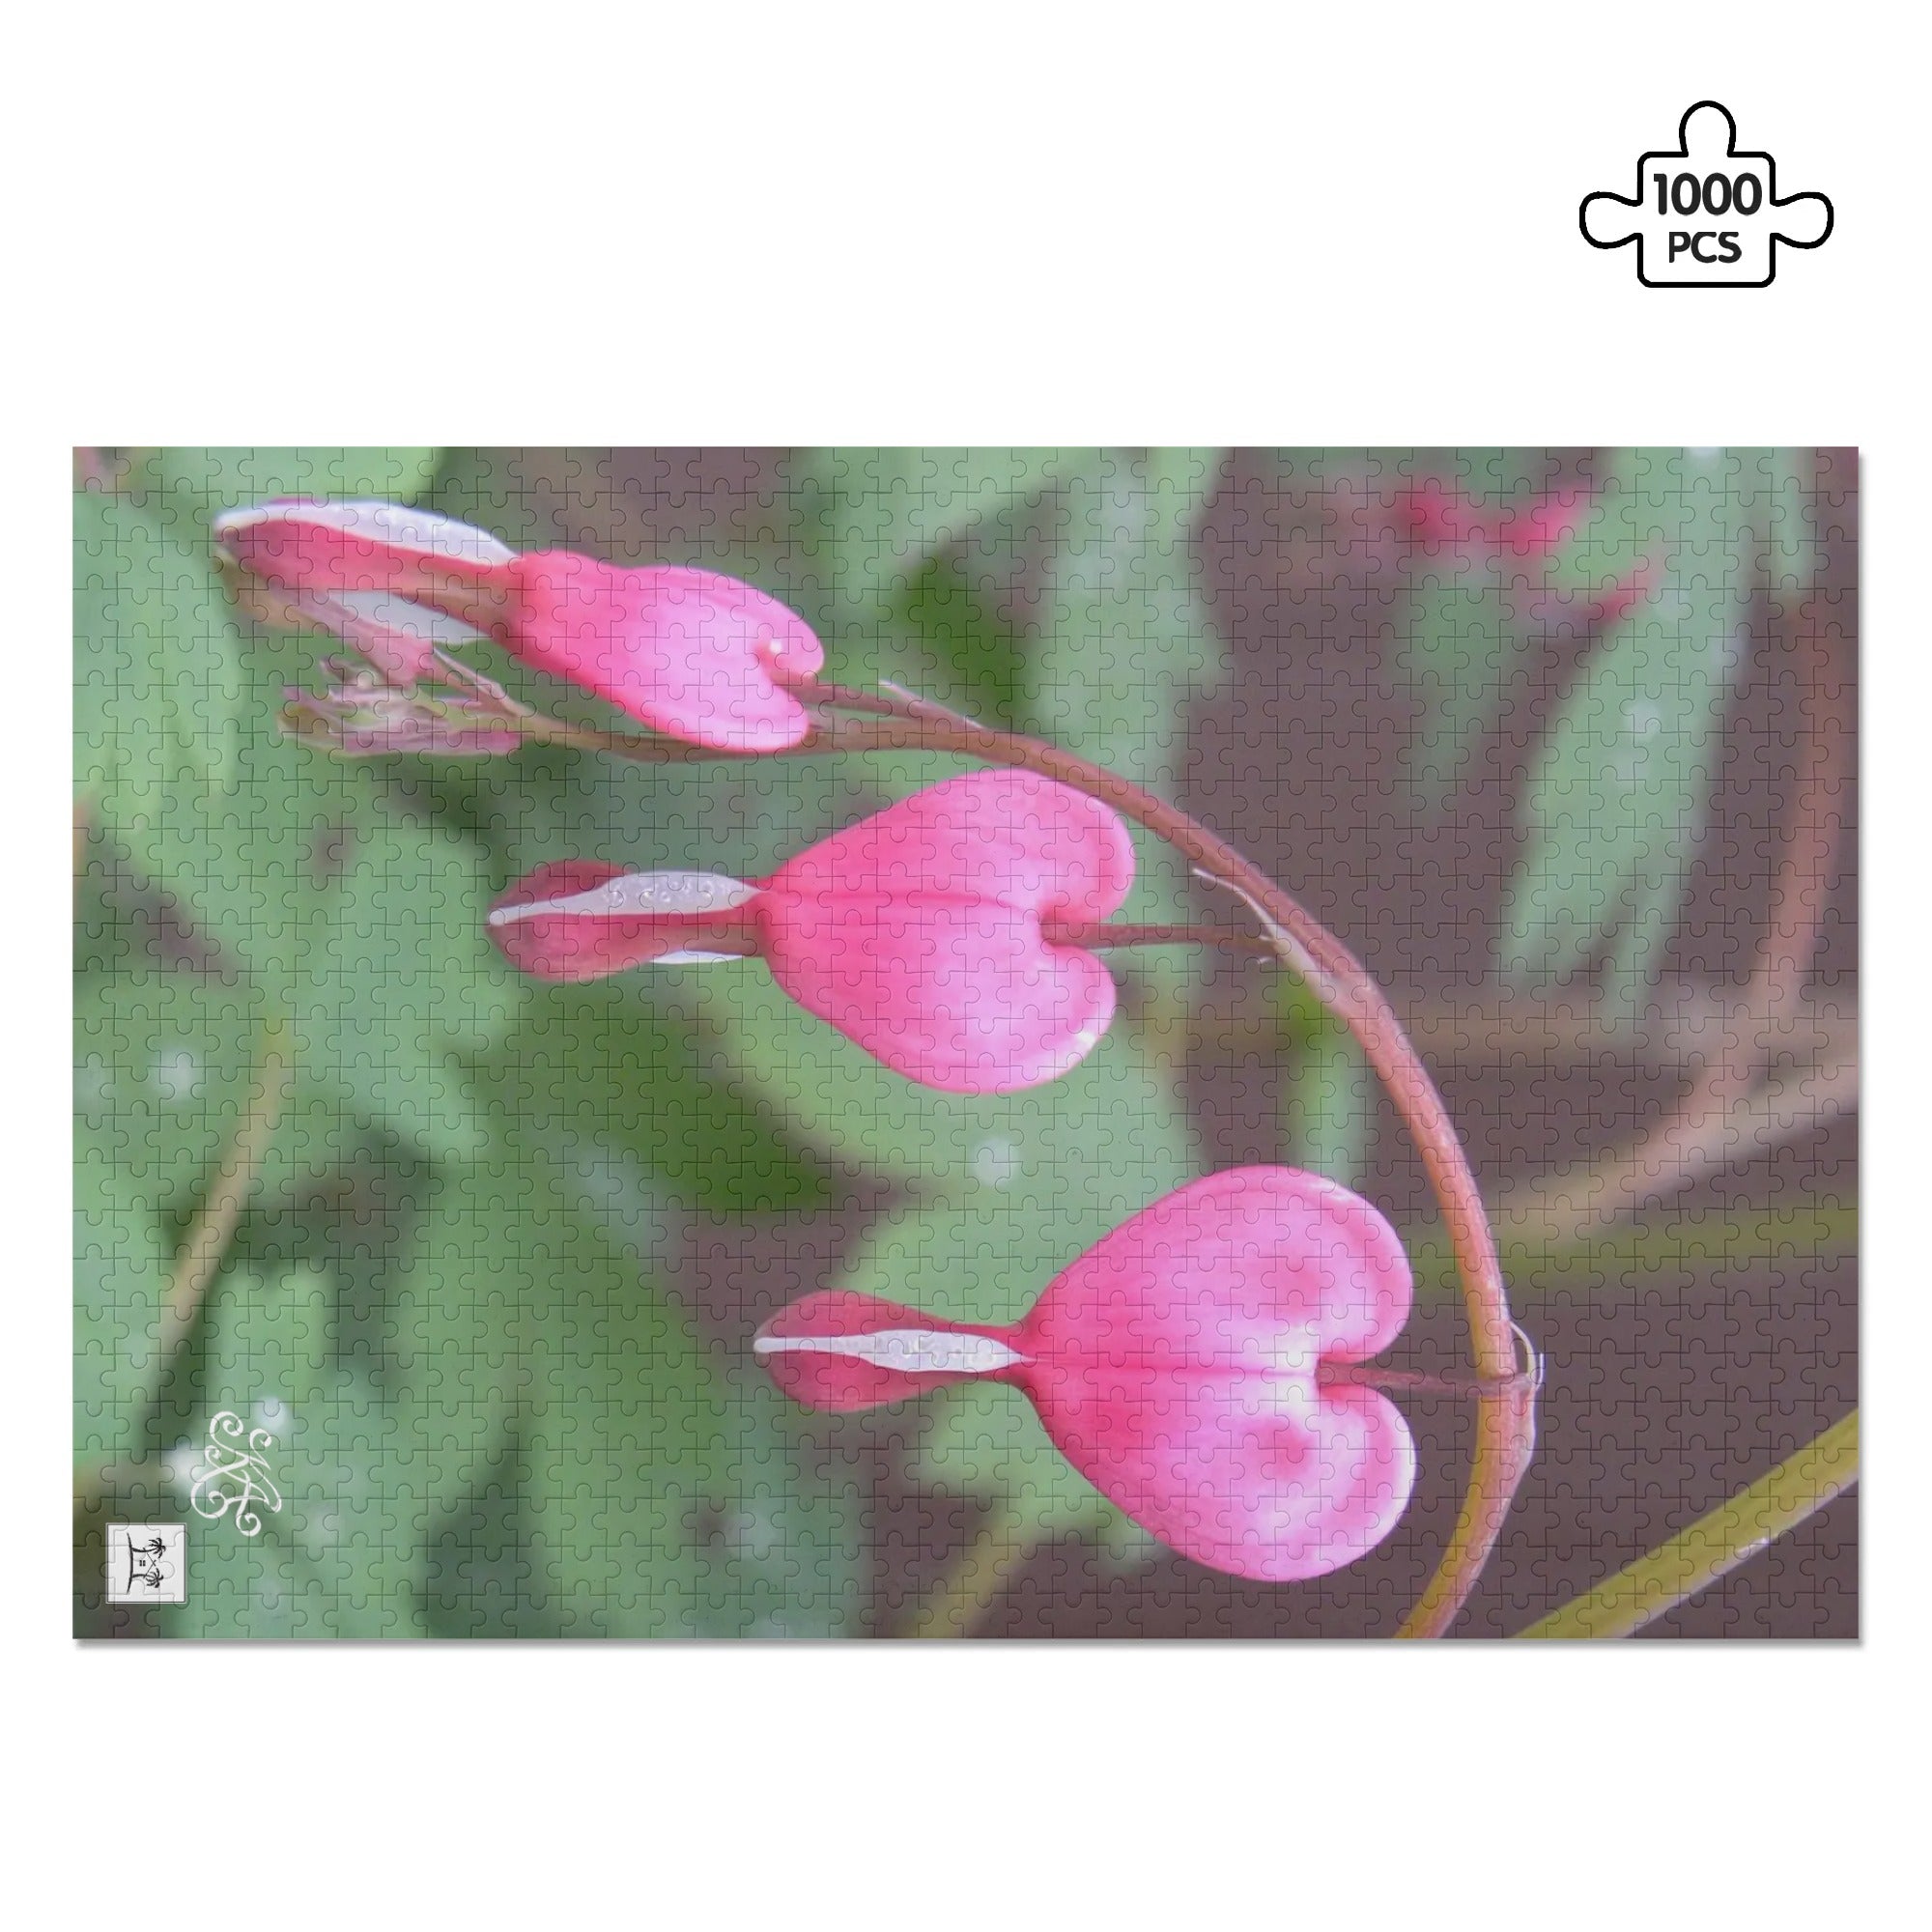 Wooden Jigsaw Puzzle (1000 Pcs) - A Chain of Bleeding Hearts